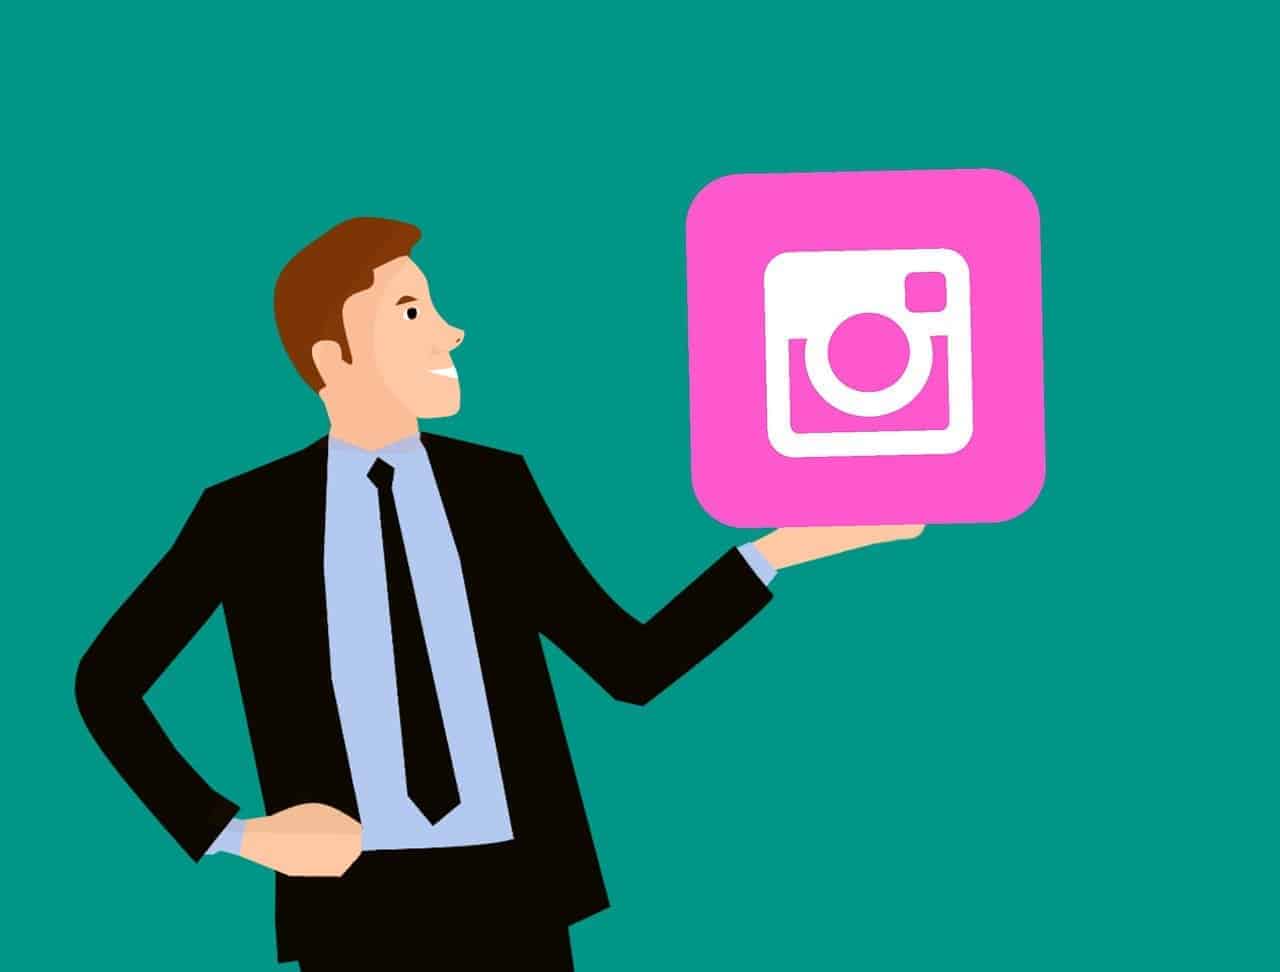 A man in a suit holding the instagram logo